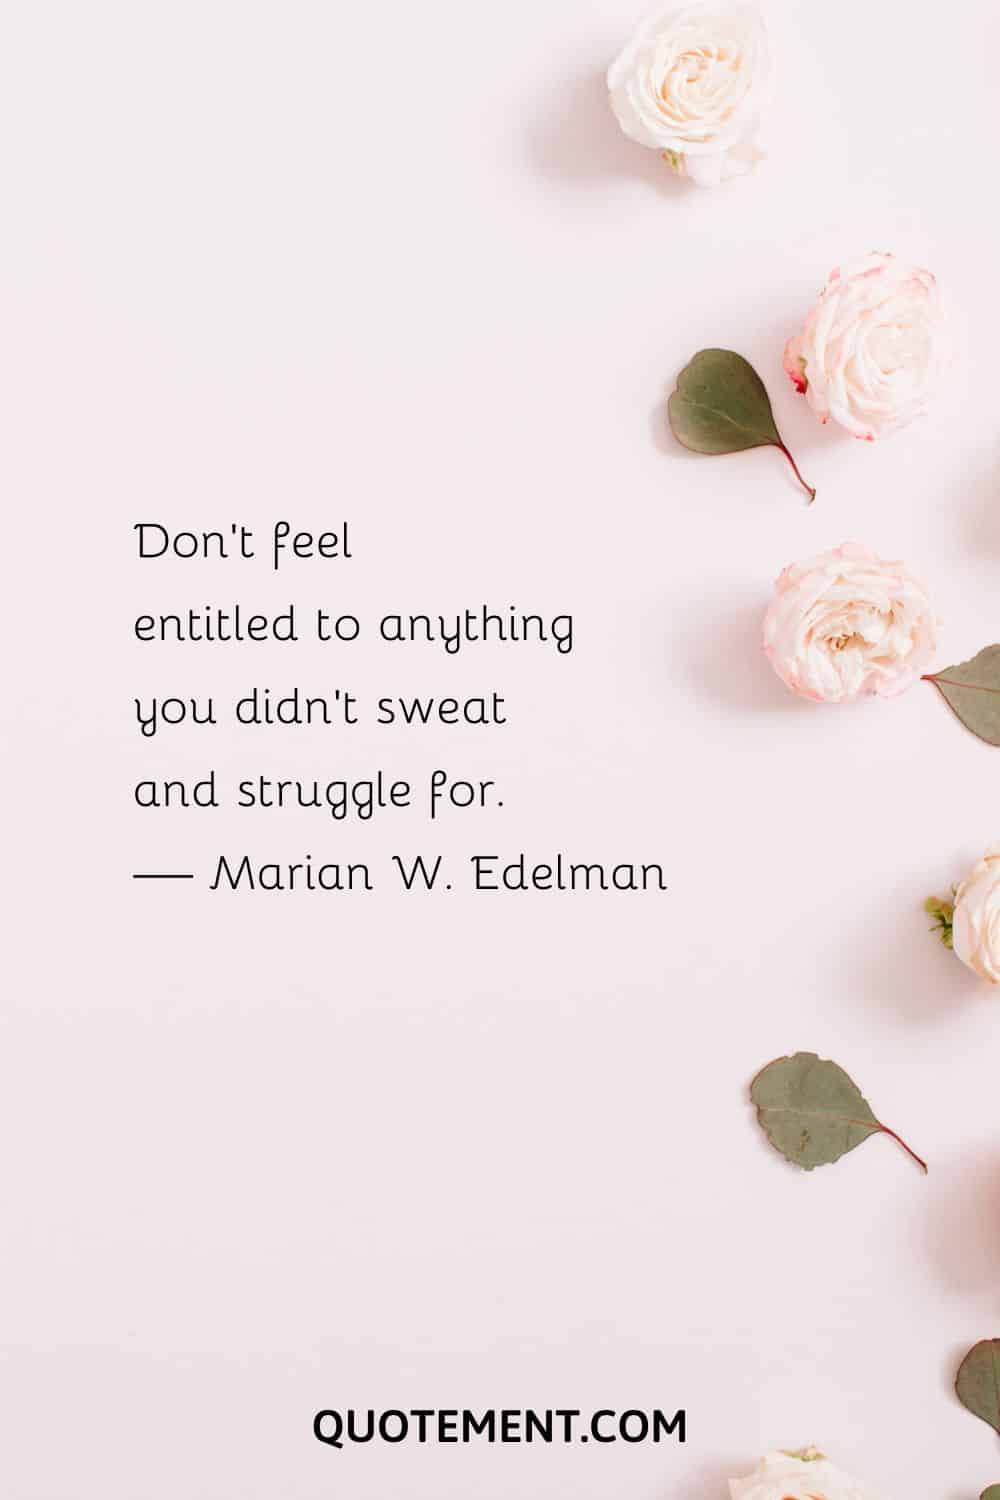 Don't feel entitled to anything you didn't sweat and struggle for